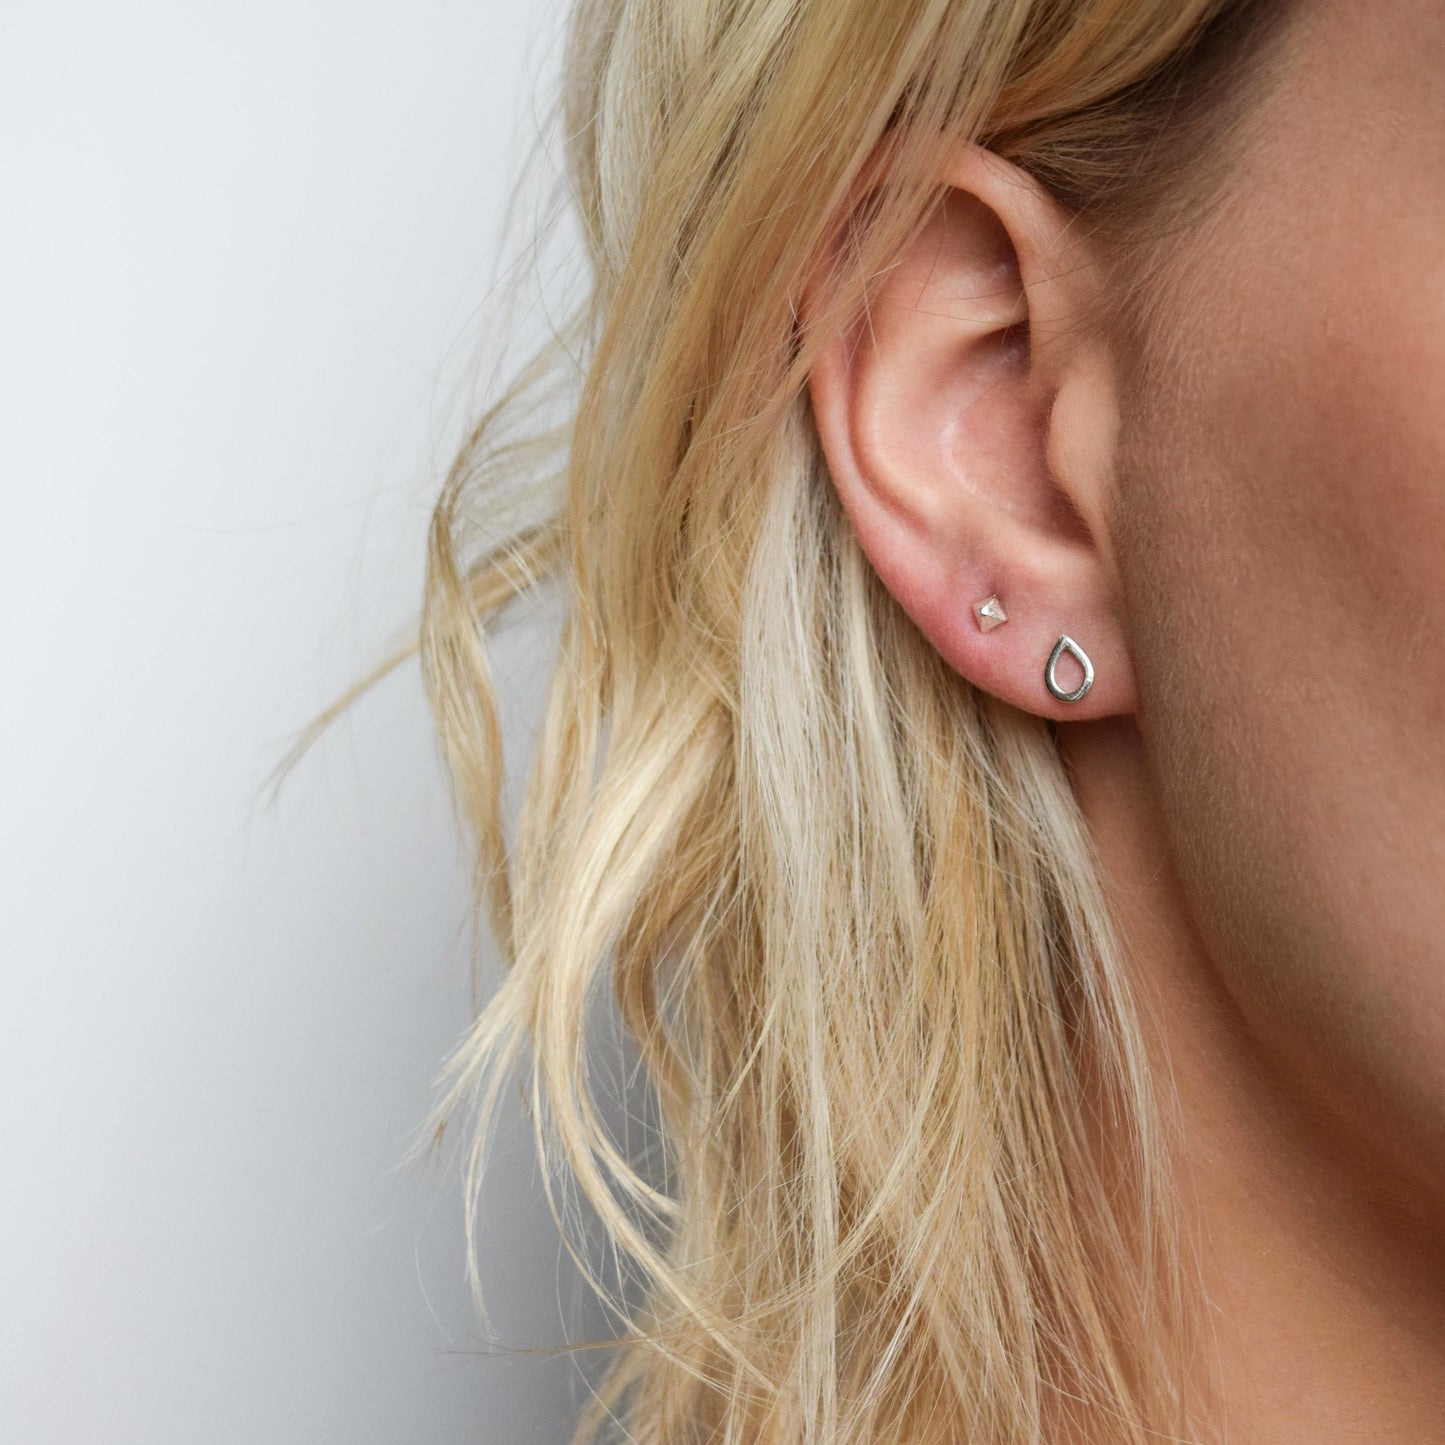 pyramid studs worn in the second piercing hole and teardrops studs in the first